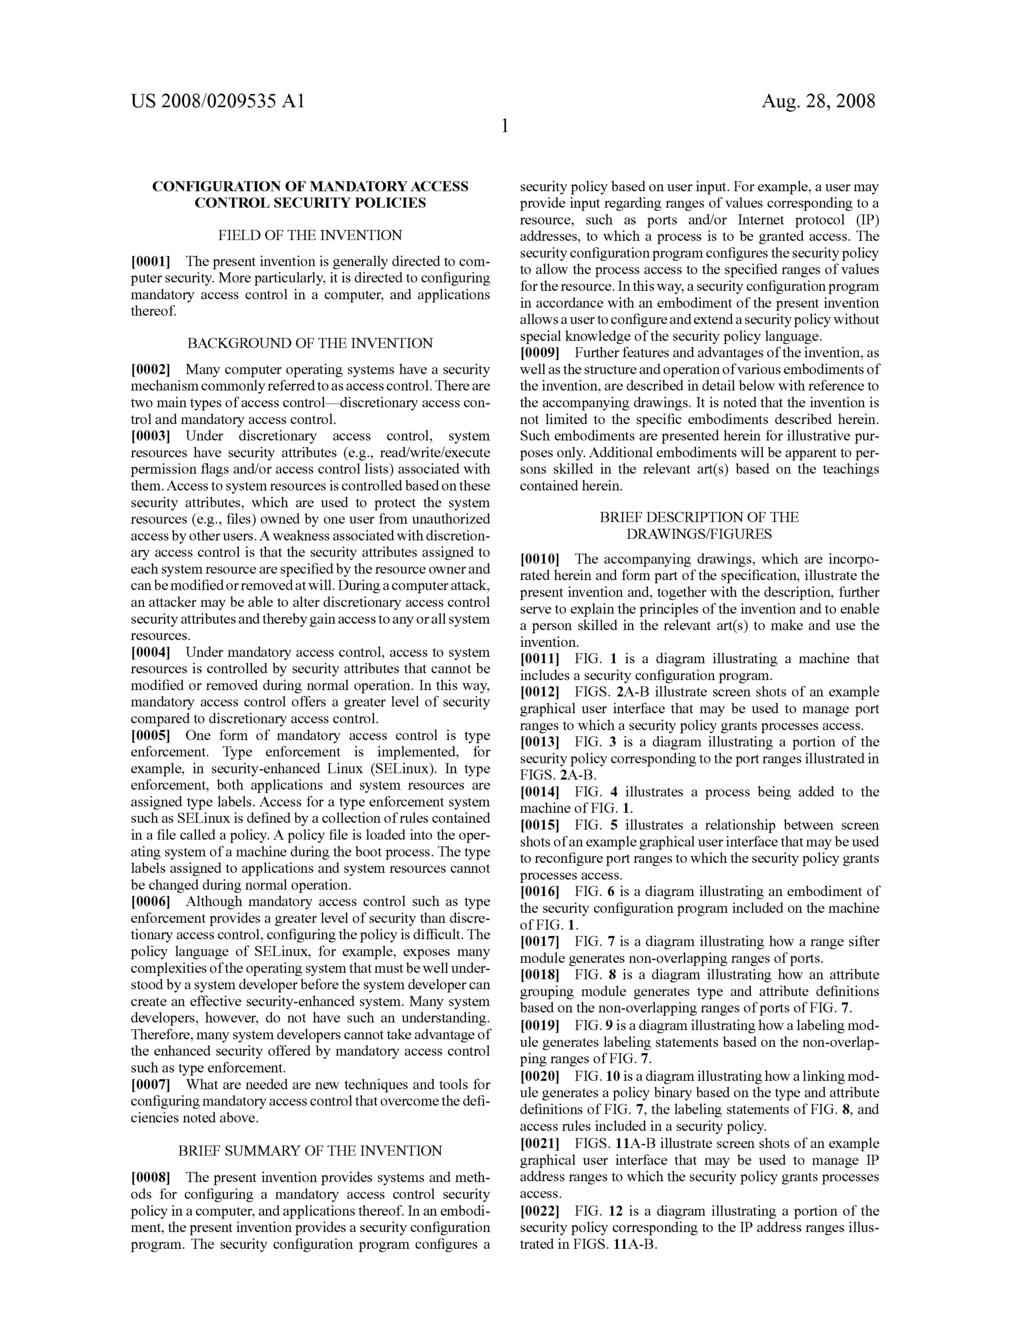 US 2008/0209535 A1 Aug. 28, 2008 CONFIGURATION OF MANDATORYACCESS CONTROL SECURITY POLICIES FIELD OF THE INVENTION 0001. The present invention is generally directed to com puter security.